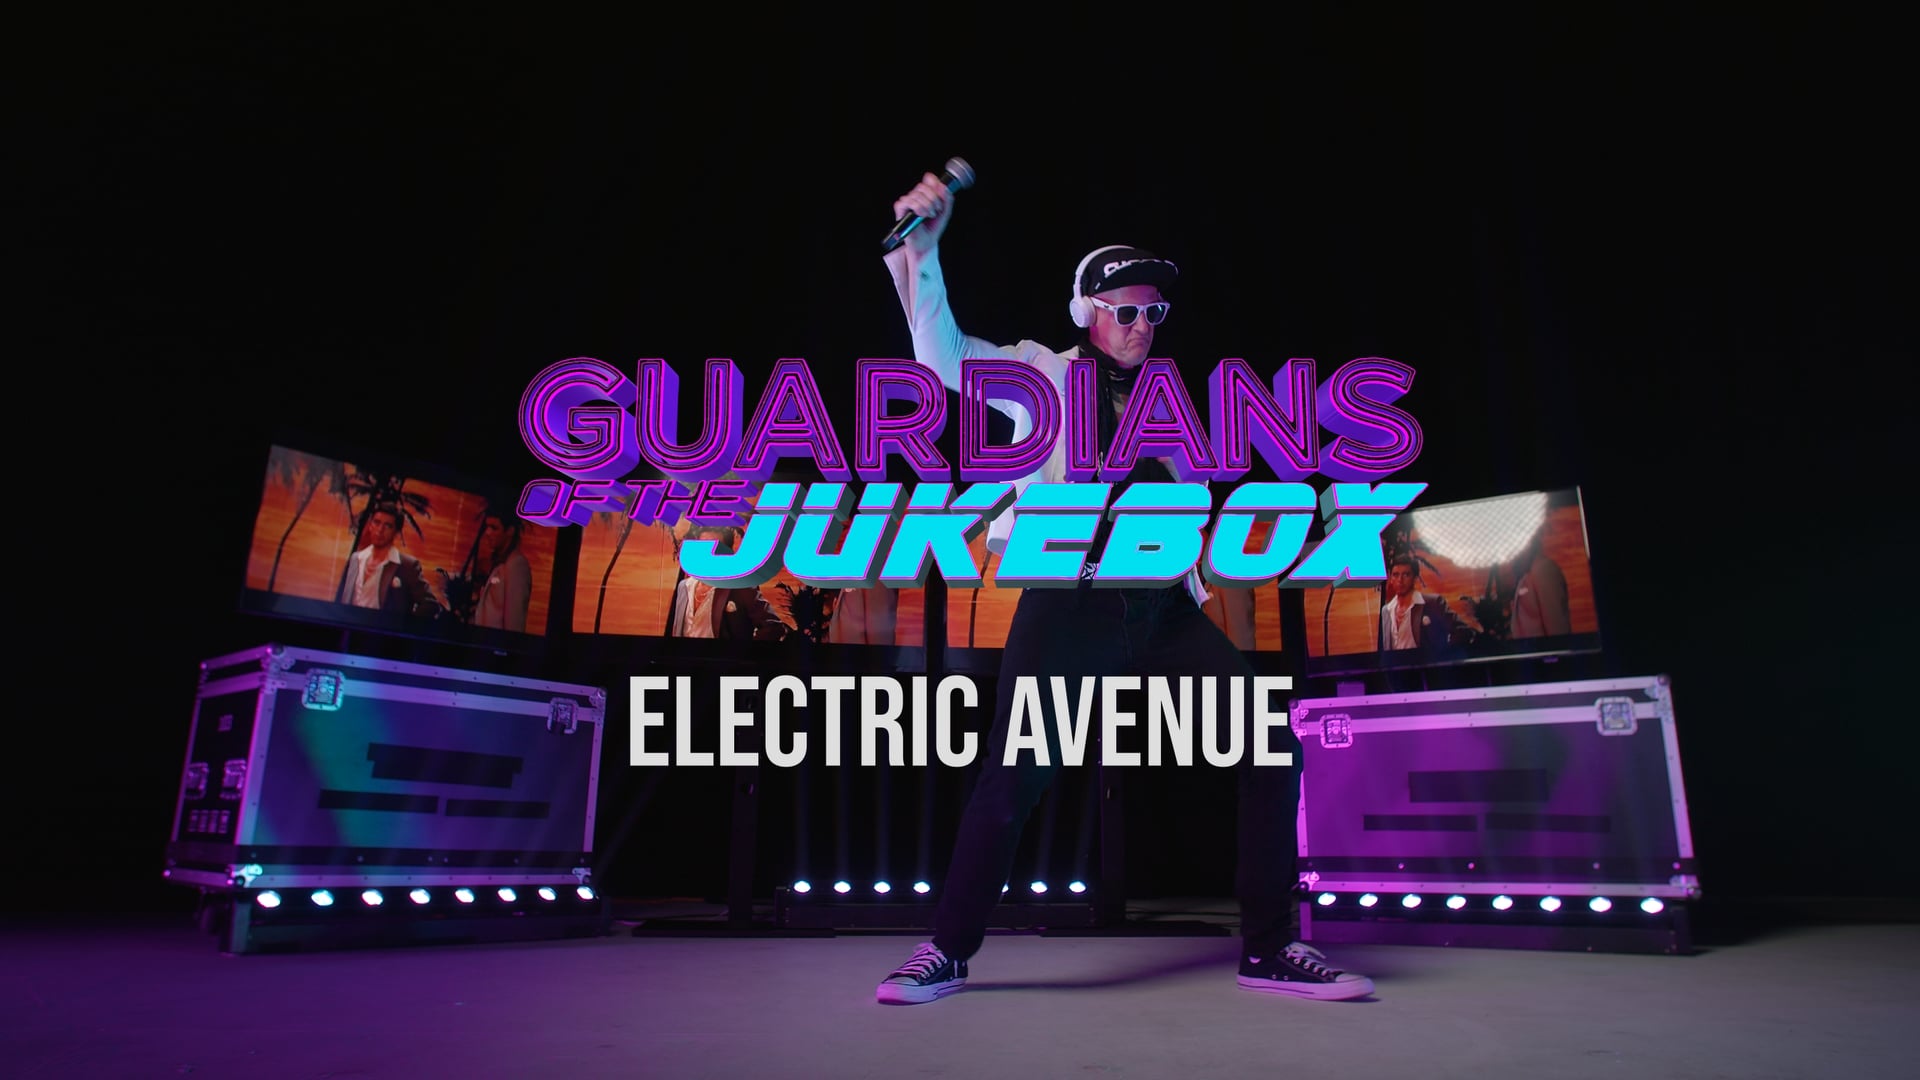 Guardians Of The Jukebox "Electric Avenue" Music Video